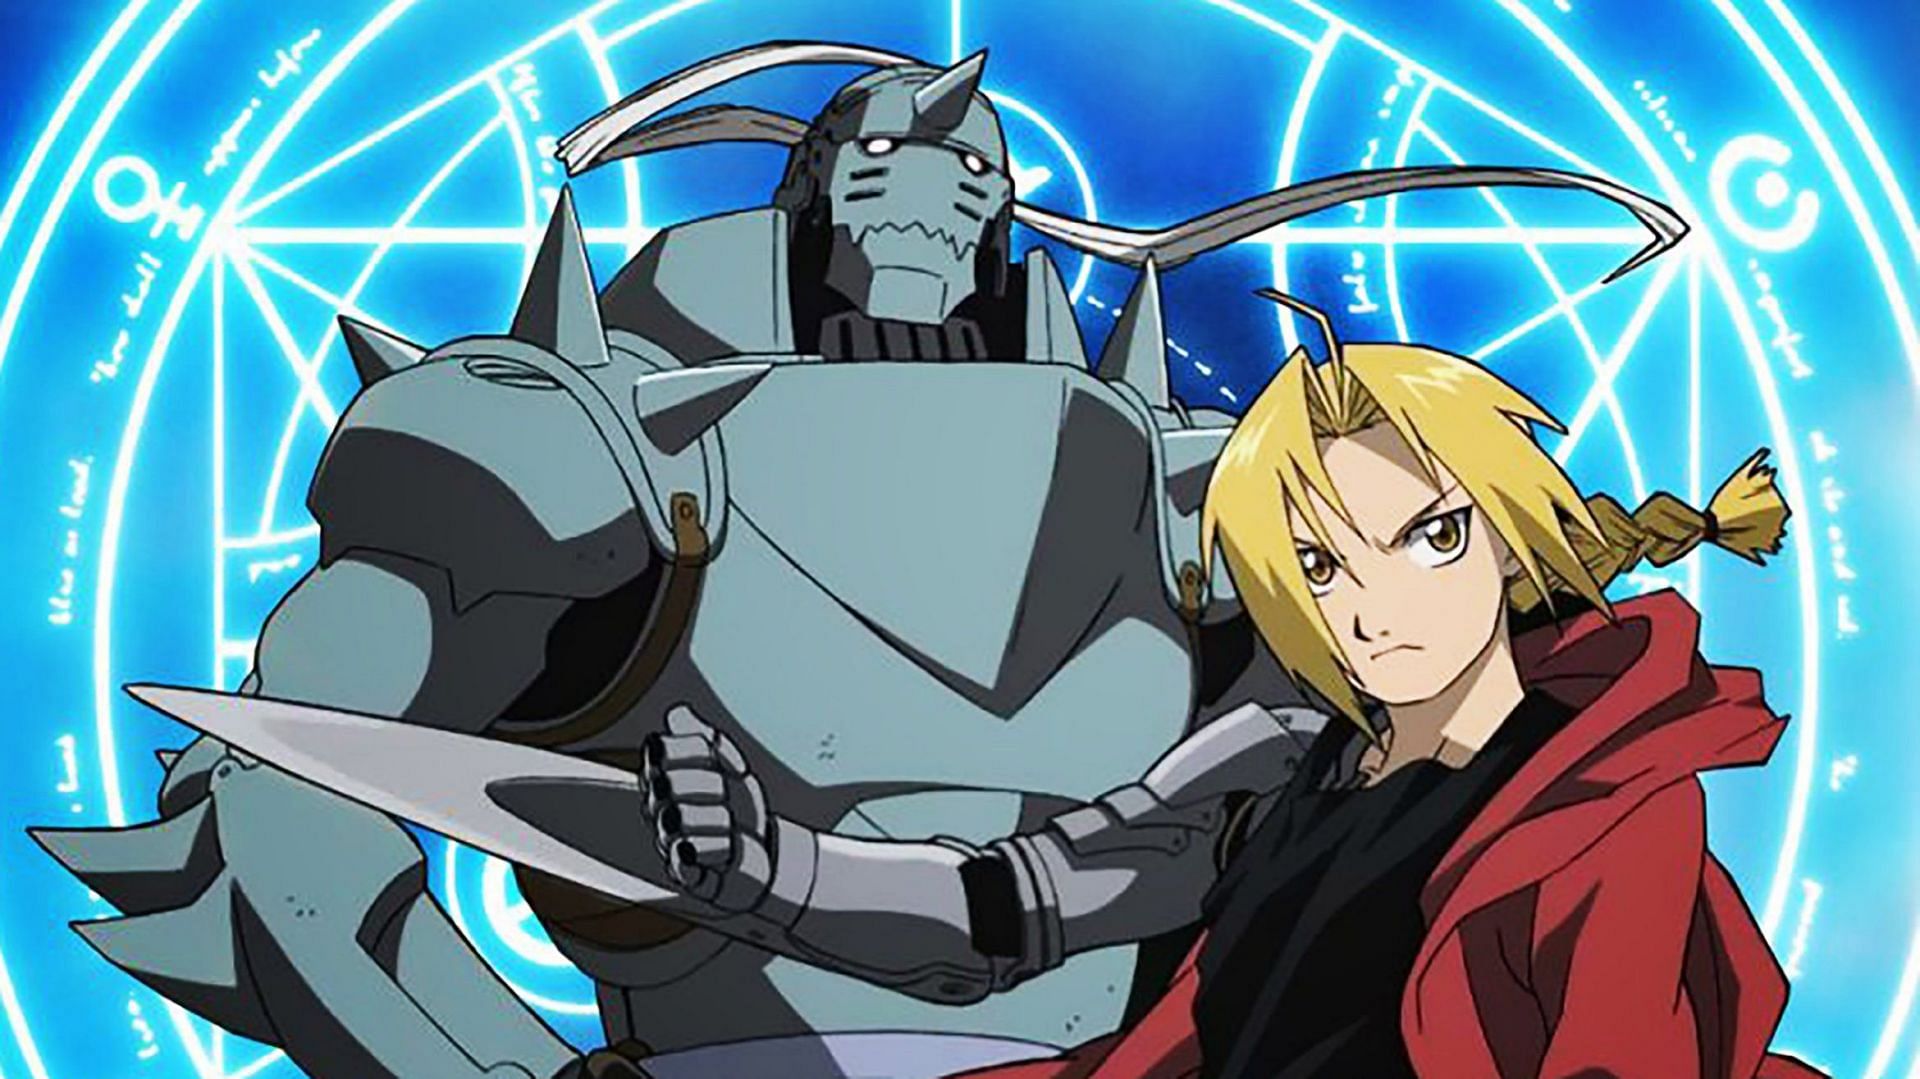 Guide to Fullmetal Alchemist watch order: Everything you need to know ...